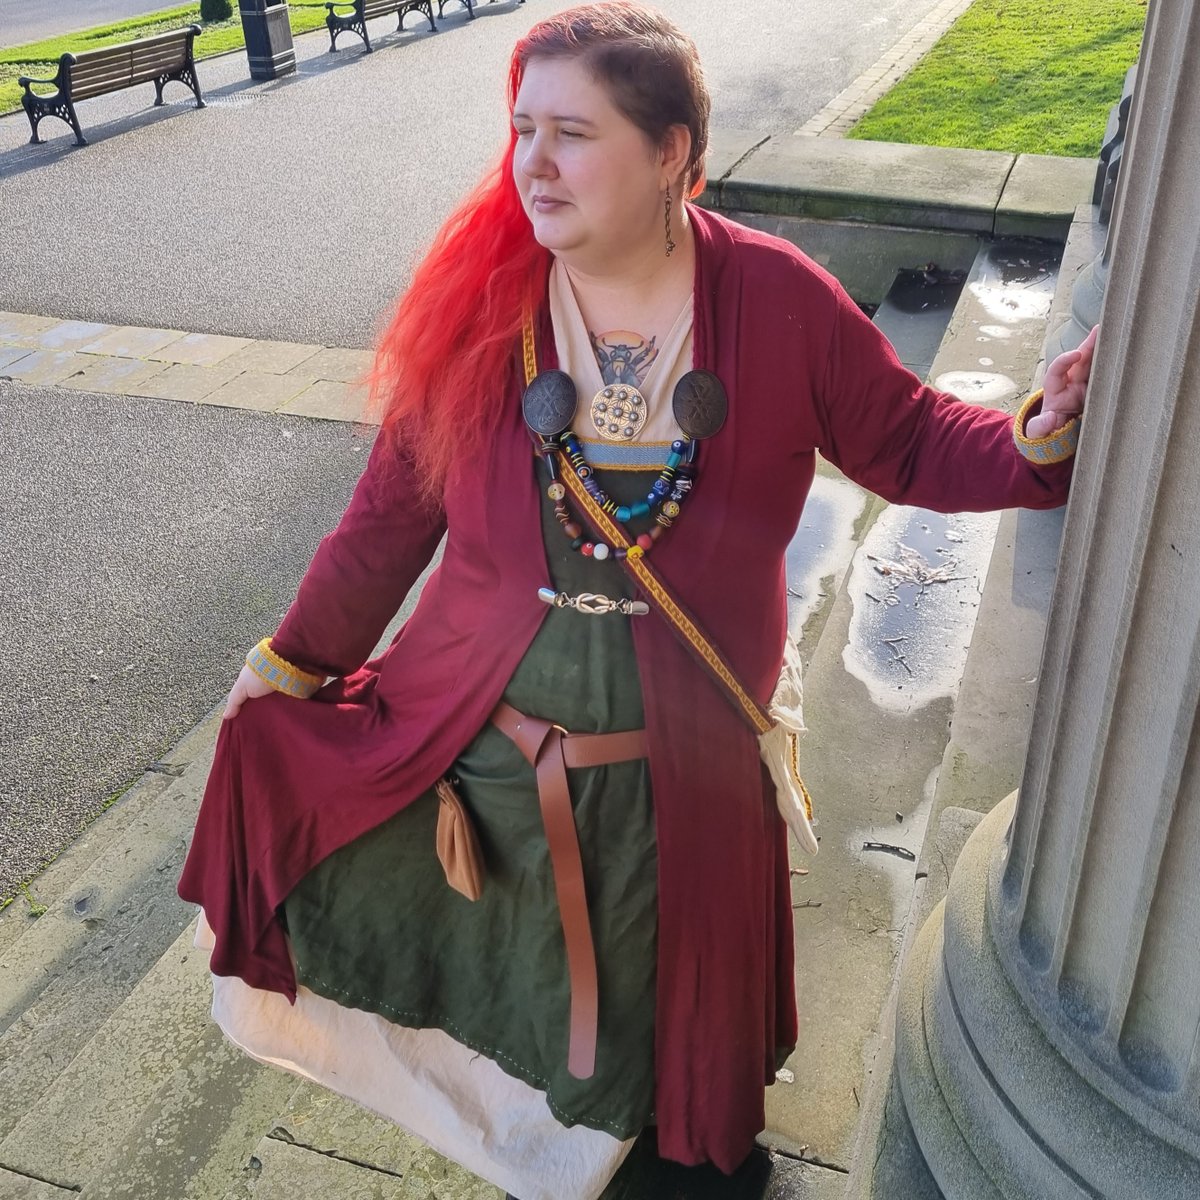 A goal I had for revamping my kit was to create different looks with the pieces I have. This was yesterday's look. I want to add a bit more detail to my coat.

#livinghistory #vikingsofinstagram #vikingreenactment #vikingcostume #vikingclothing #history #viking #vikingwoman